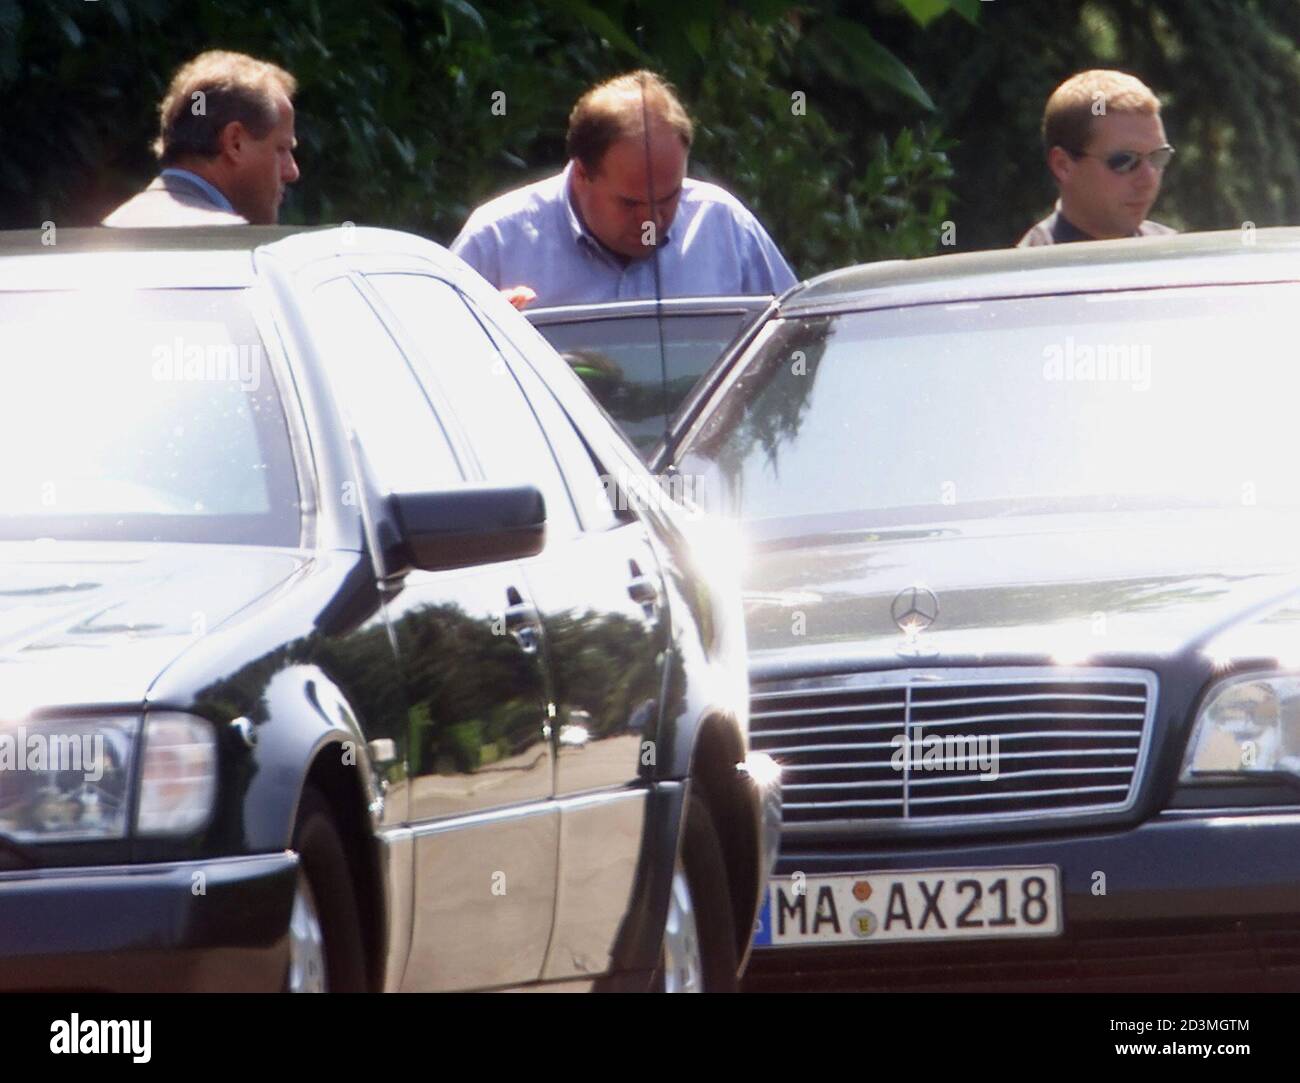 Walter Kohl, son of former German Chancellor Helmut Kohl, leaves the family house the day after his mother Hannelore was found dead in Oggersheim near Ludwigshafen July 6, 2001. Hannelore Kohl, wife of Helmet Kohl for 41 years committed suicide to end her suffering from a rare light allergy illness on July 5, 2001.  JS/JOH Stock Photo